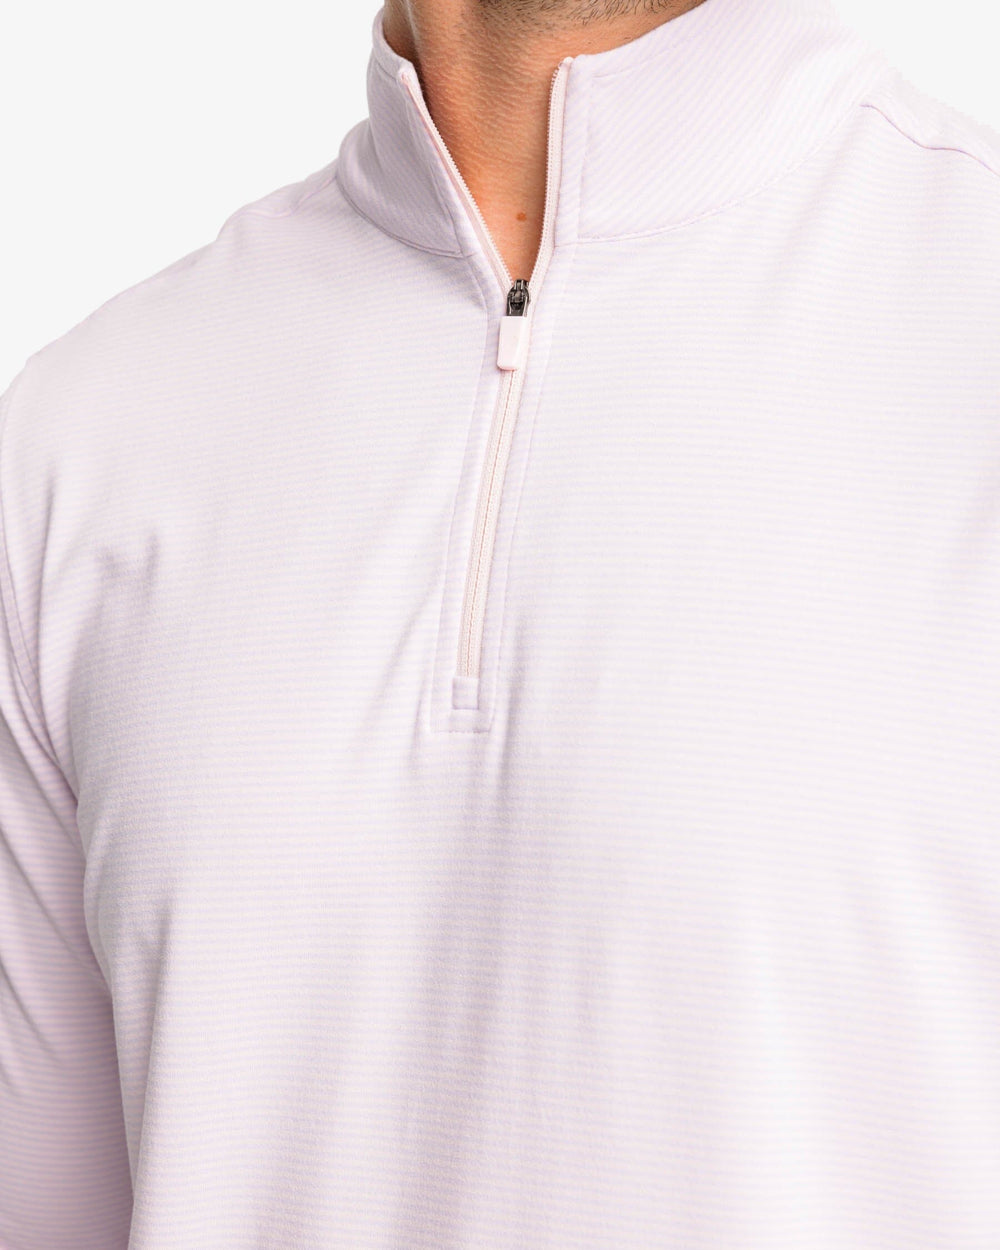 The detail view of the Southern Tide Cruiser Heather Micro-Stripe Performance Quarter Zip by Southern Tide - Heather Rose Blush